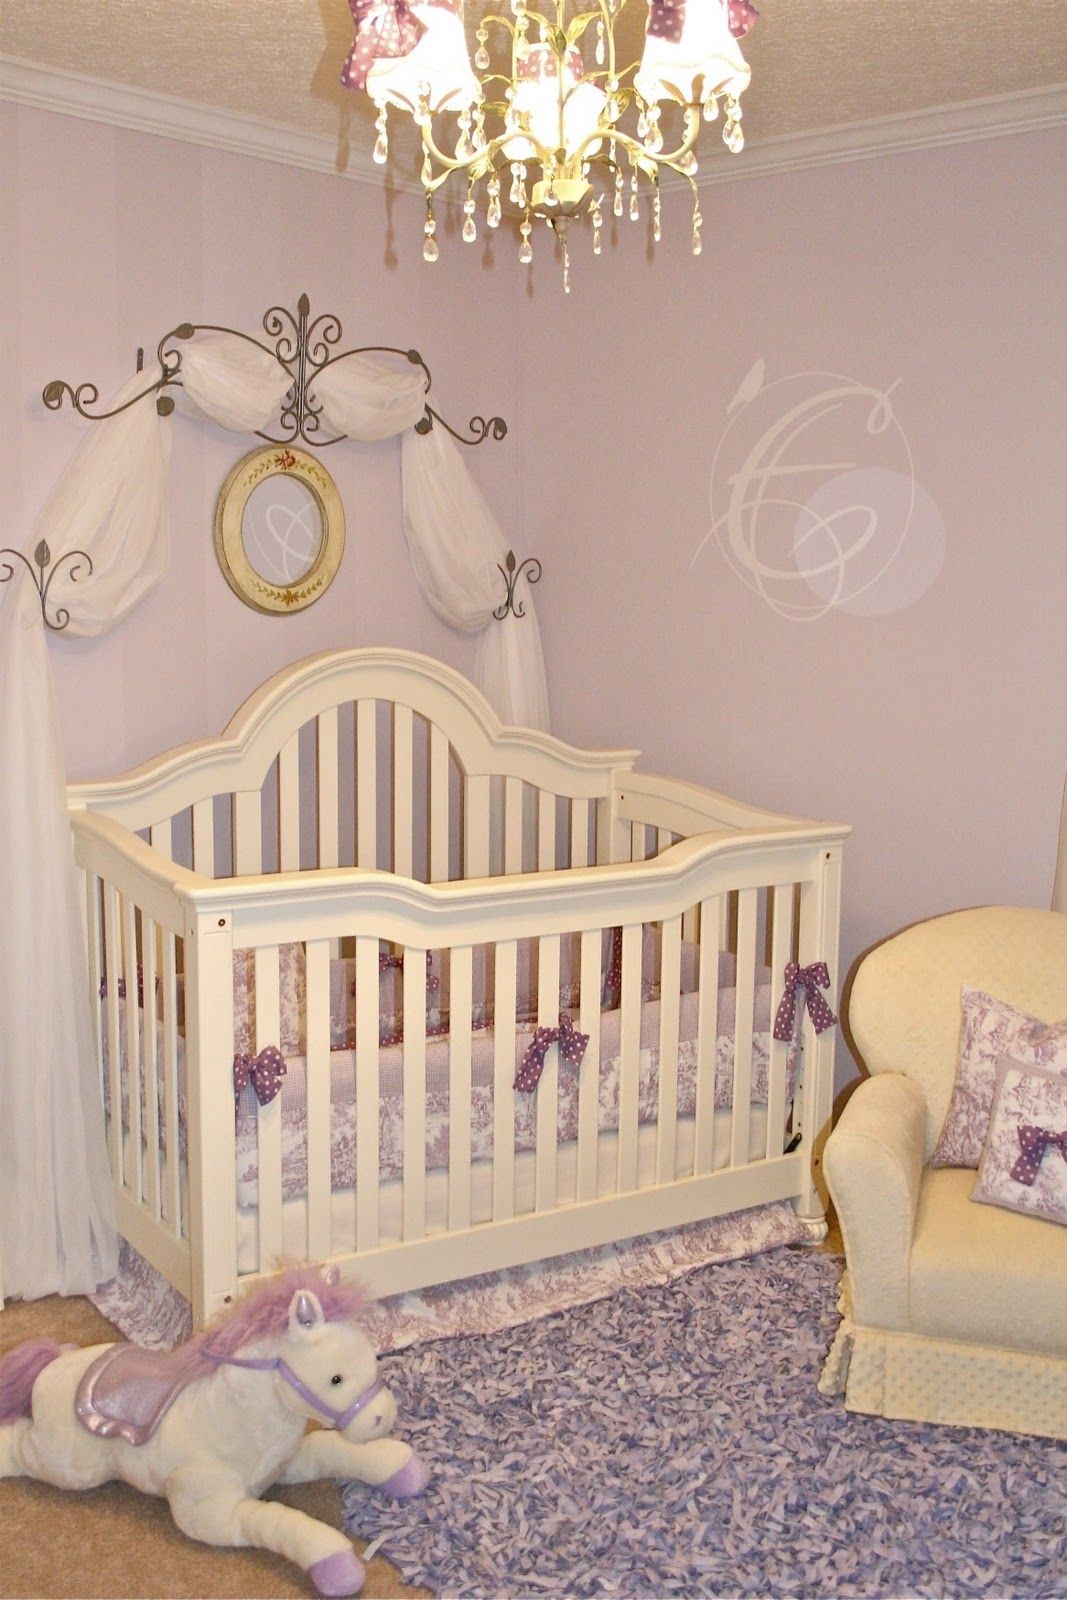 Ba Room Chandelier For Nursery Design Ideas Decors For Chandeliers For Baby Girl Room (View 4 of 24)